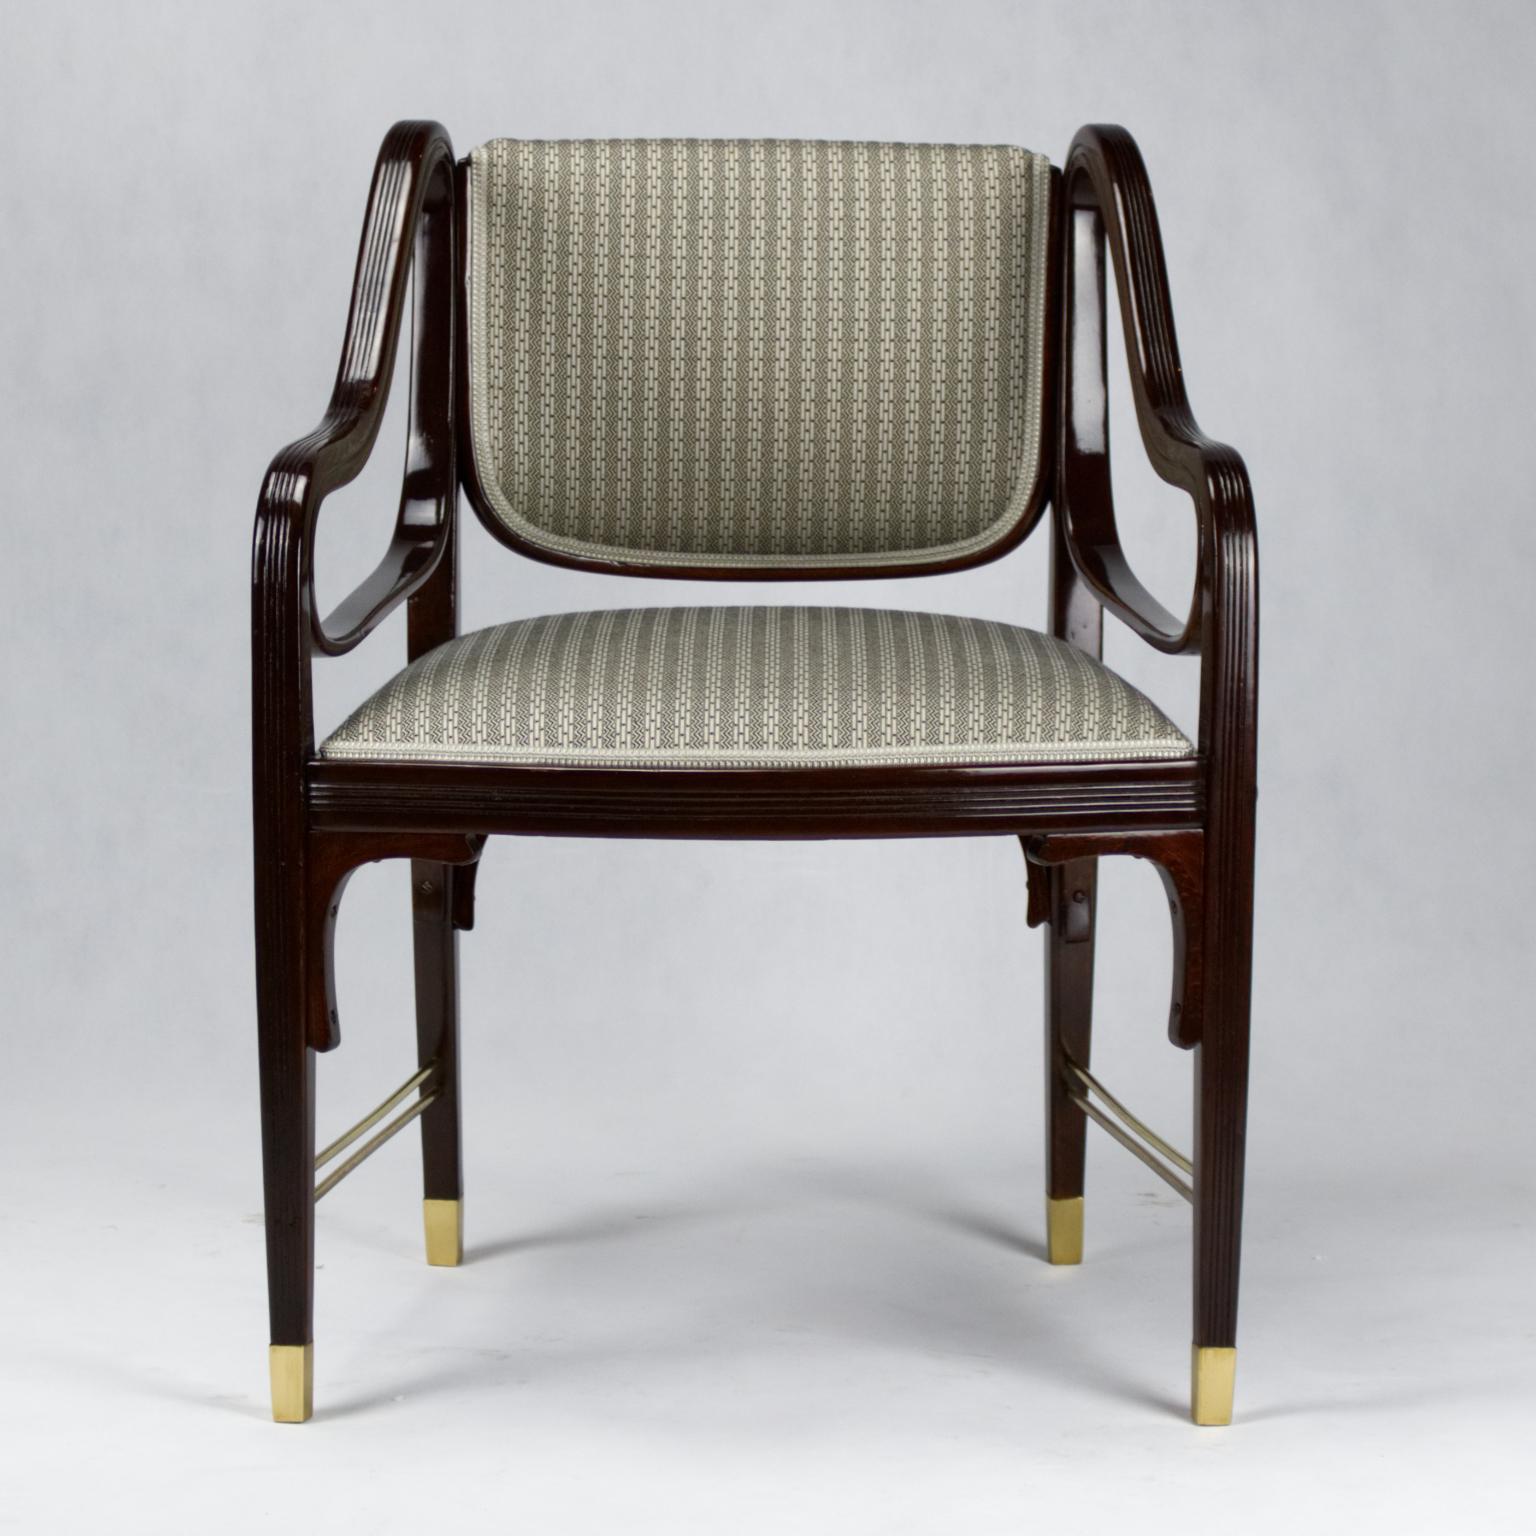 Design created by Otto Wagner (1841-1918) and manufactured by Jacob & Josef Kohn Manufactory. Beechwood / mahogany stained / brass / seat covered with new fabric and horizontal brass struttings attached to feet.
Catalogue 